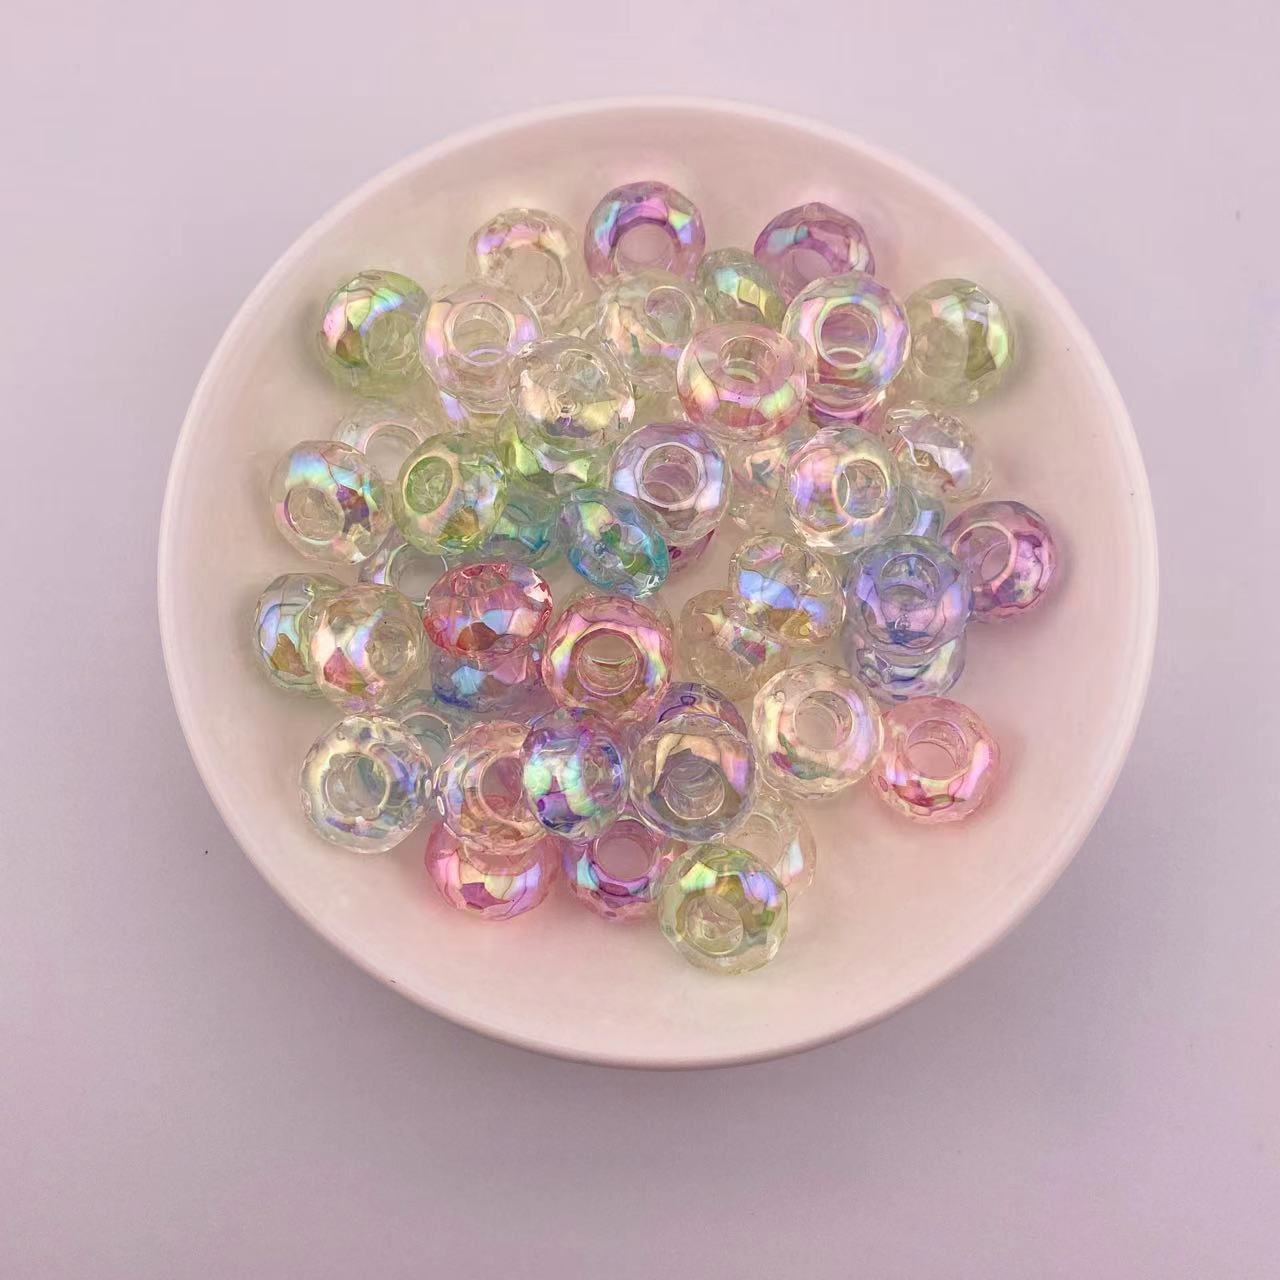 50 Pieces Mixed Color Clear Shiny Pen Spacer Beads